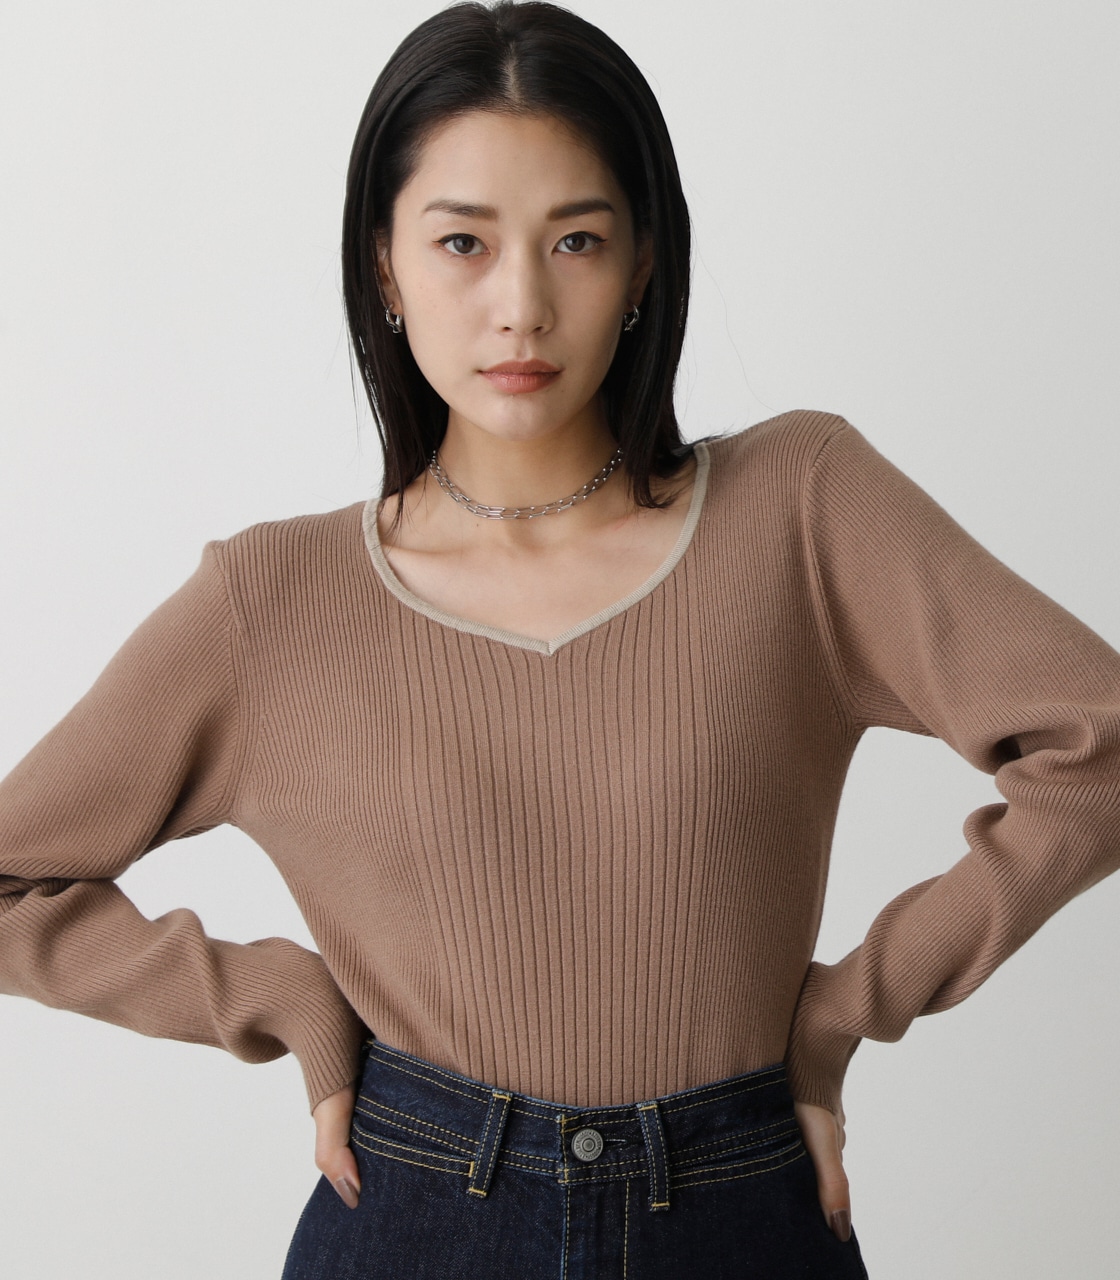 BACK LACE-UP KNIT TOPS/バックレースアップニットトップス 詳細画像 L/BRN 3